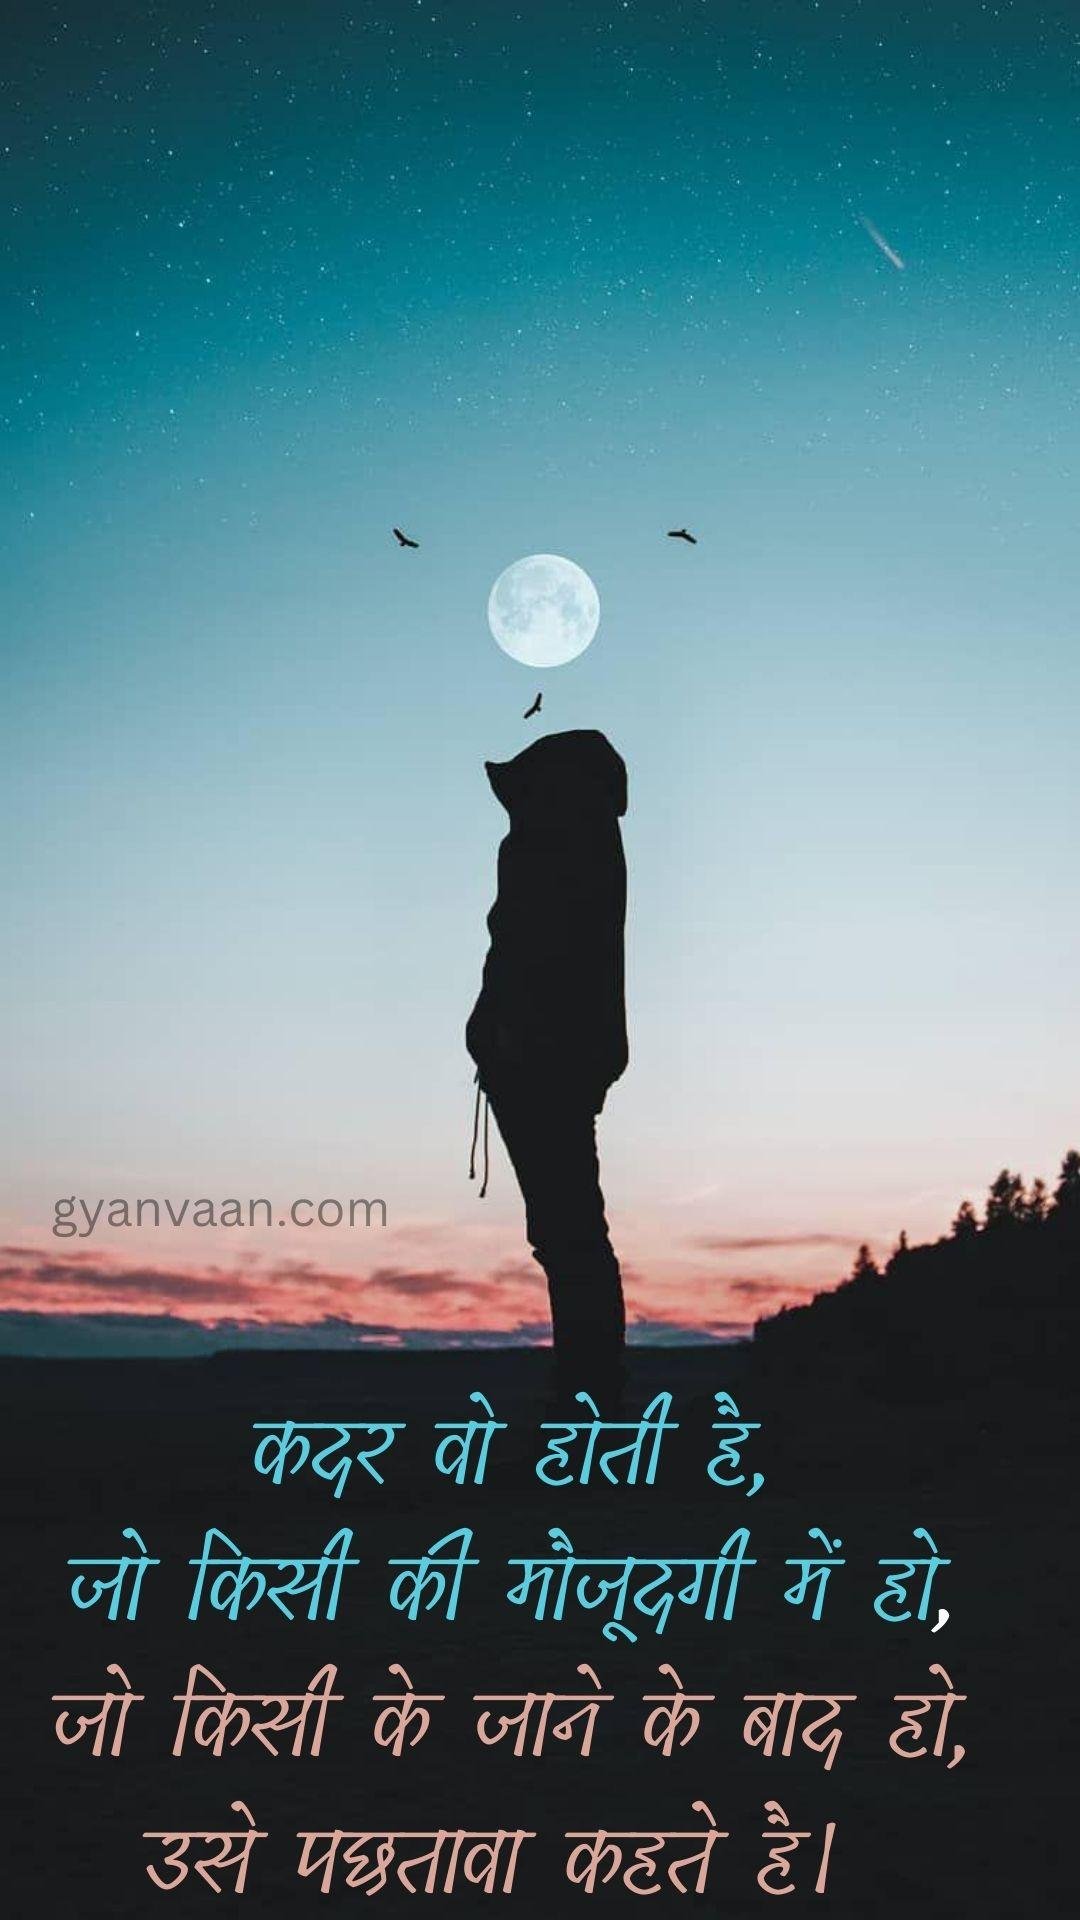 Very Heart Touching Sad Quotes In Hindi For Mobile Devices 6 - Very Heart Touching Sad Quotes In Hindi